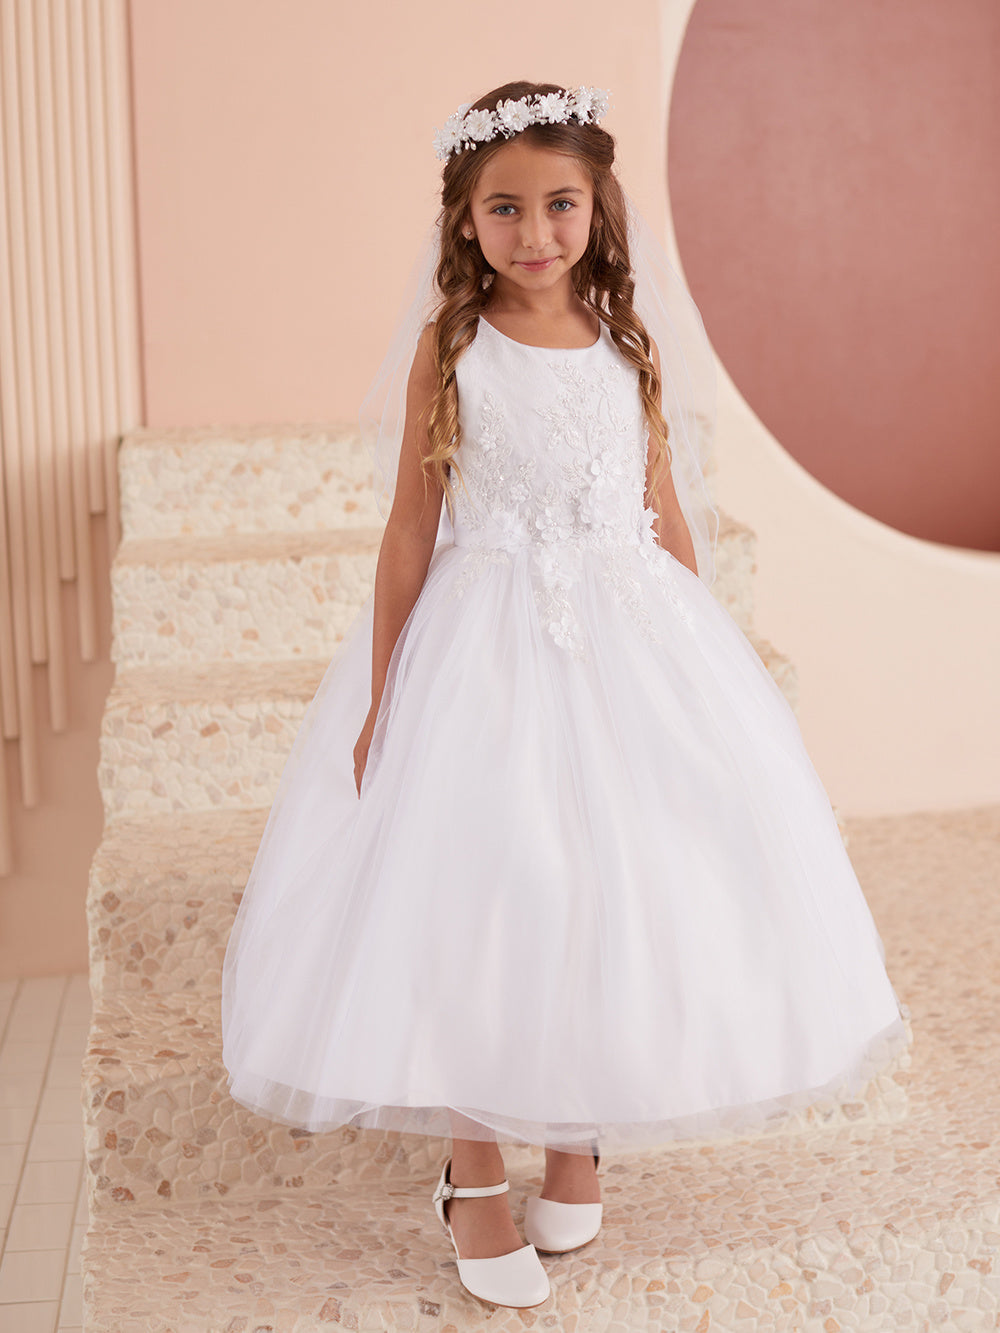 3D Lace Bodice Flowers Girl Dress by TIPTOP KIDS - AS5857